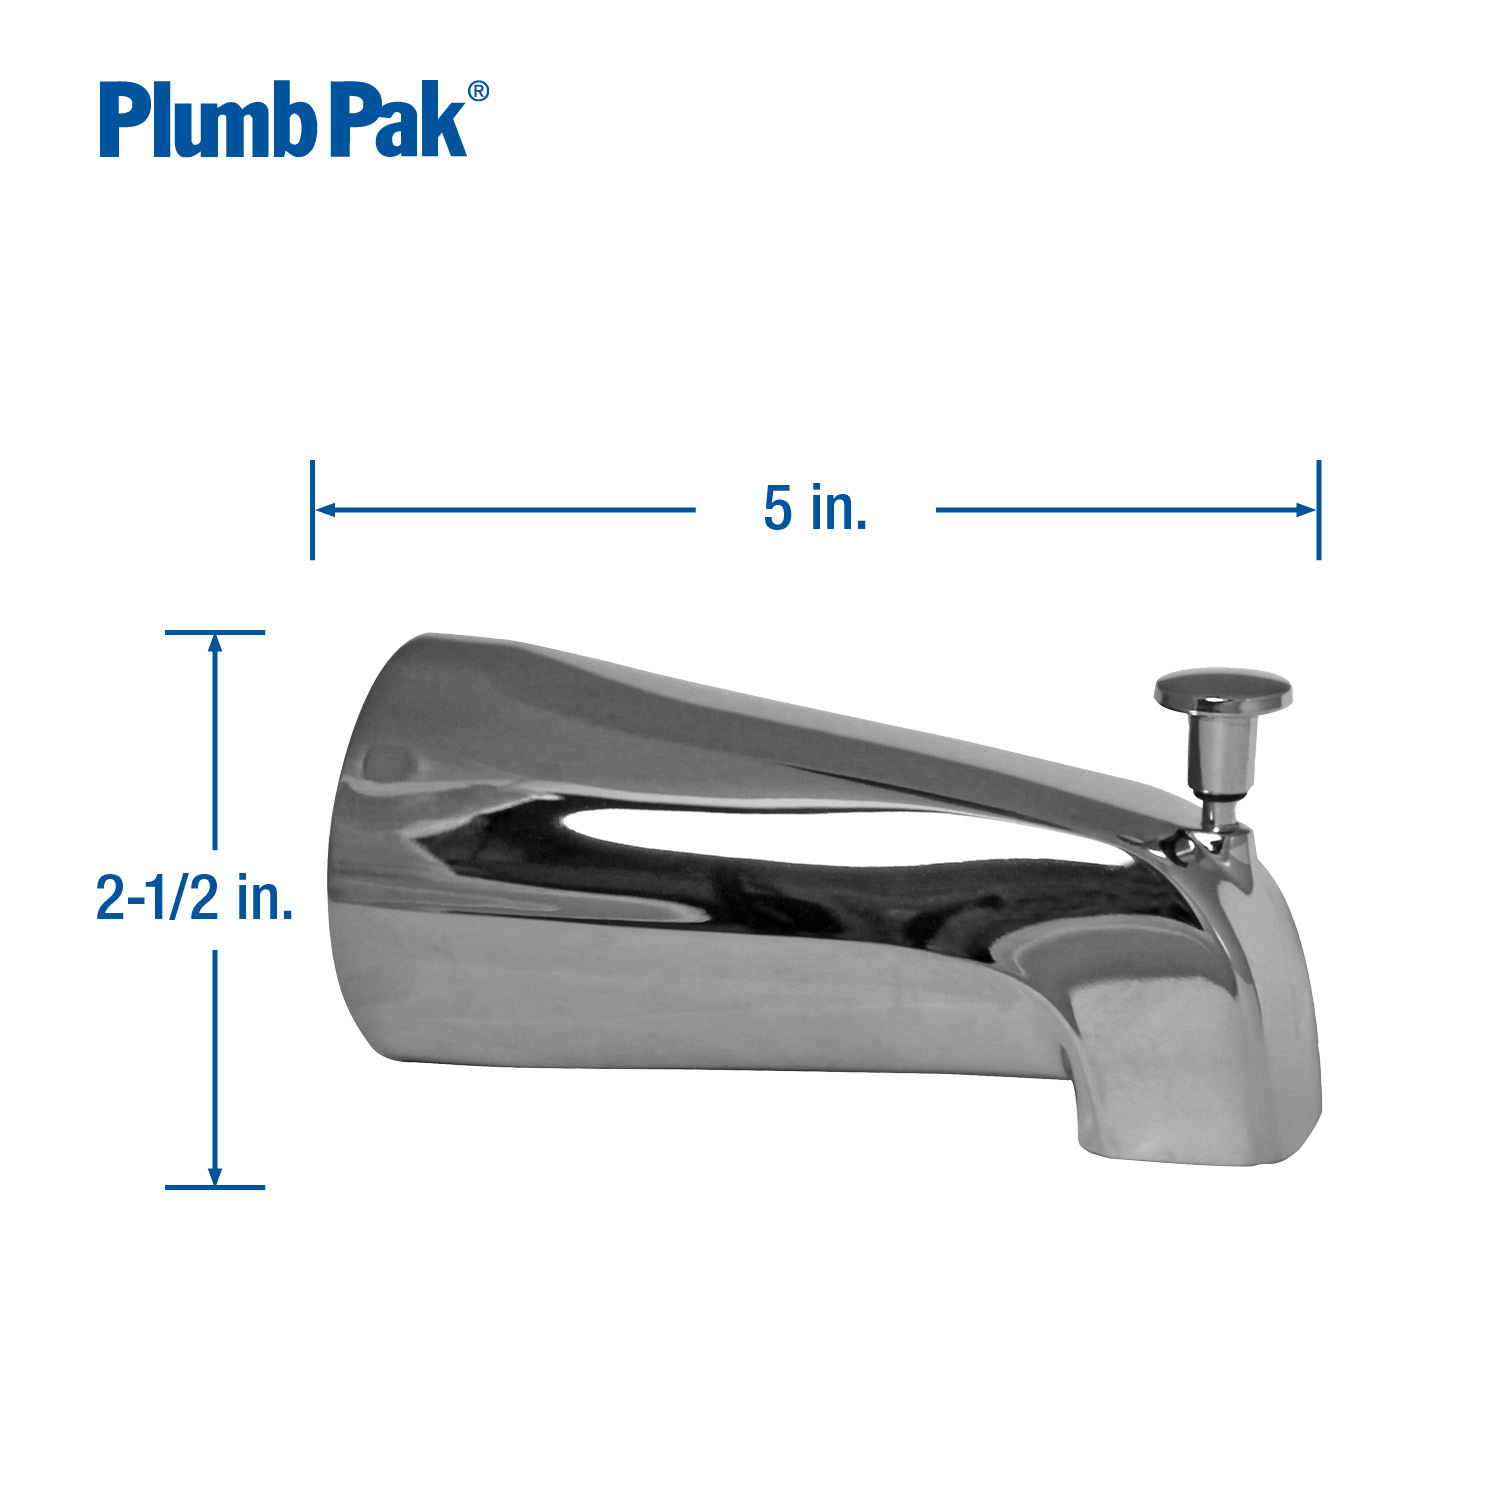 Keeney PP825-35 Universal Tub Spout with Front Diverter, Polished Chrome - image 5 of 9